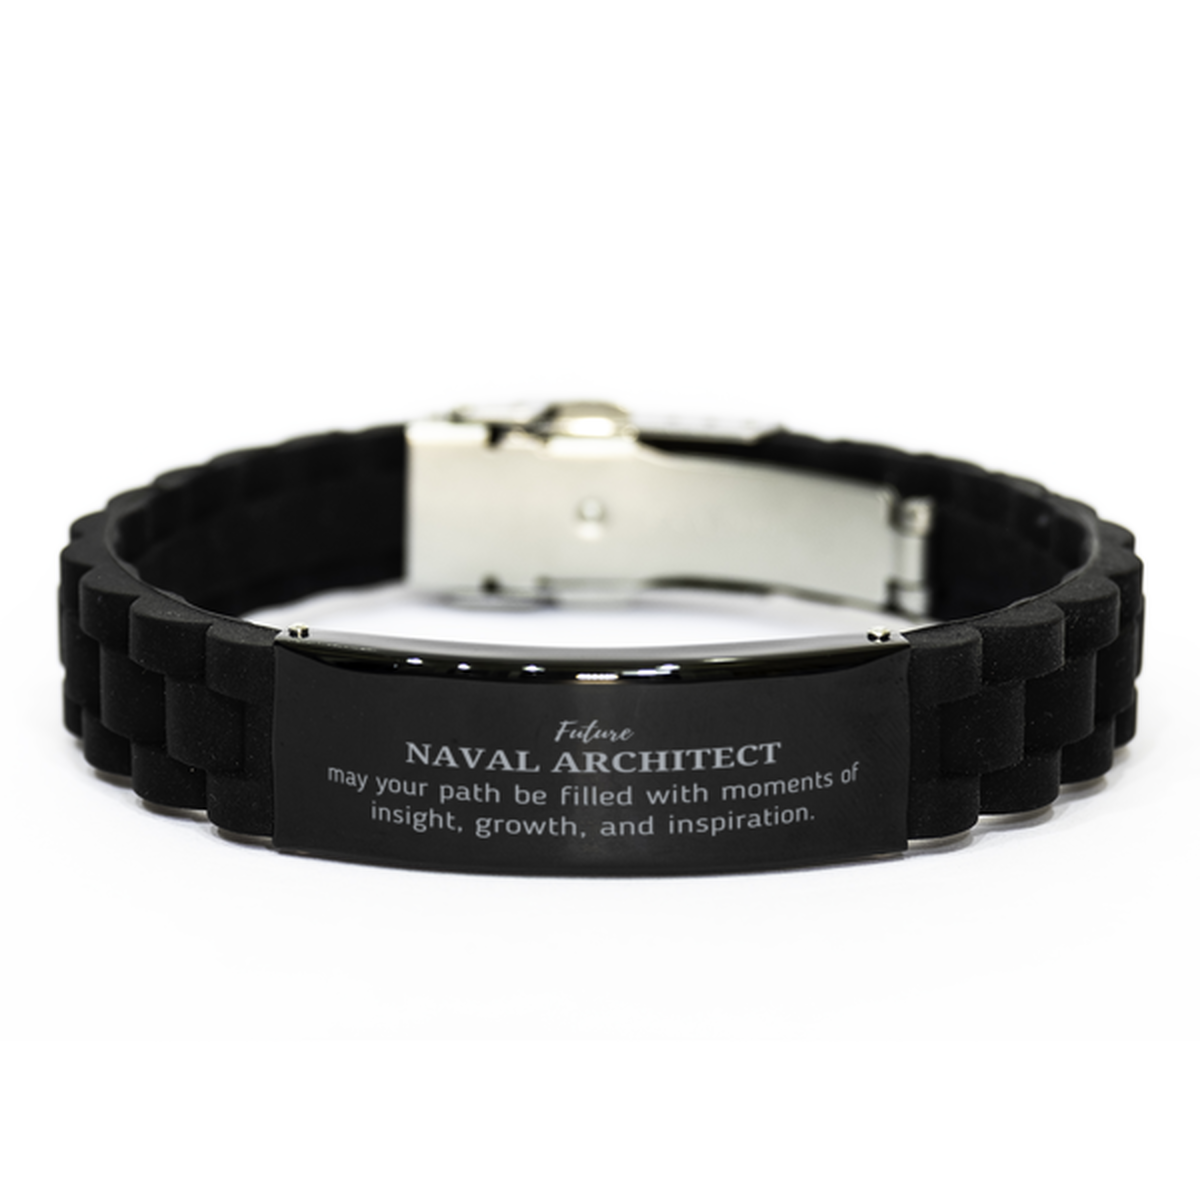 Future Naval Architect Gifts, May your path be filled with moments of insight, Graduation Gifts for New Naval Architect, Christmas Unique Black Glidelock Clasp Bracelet For Men, Women, Friends